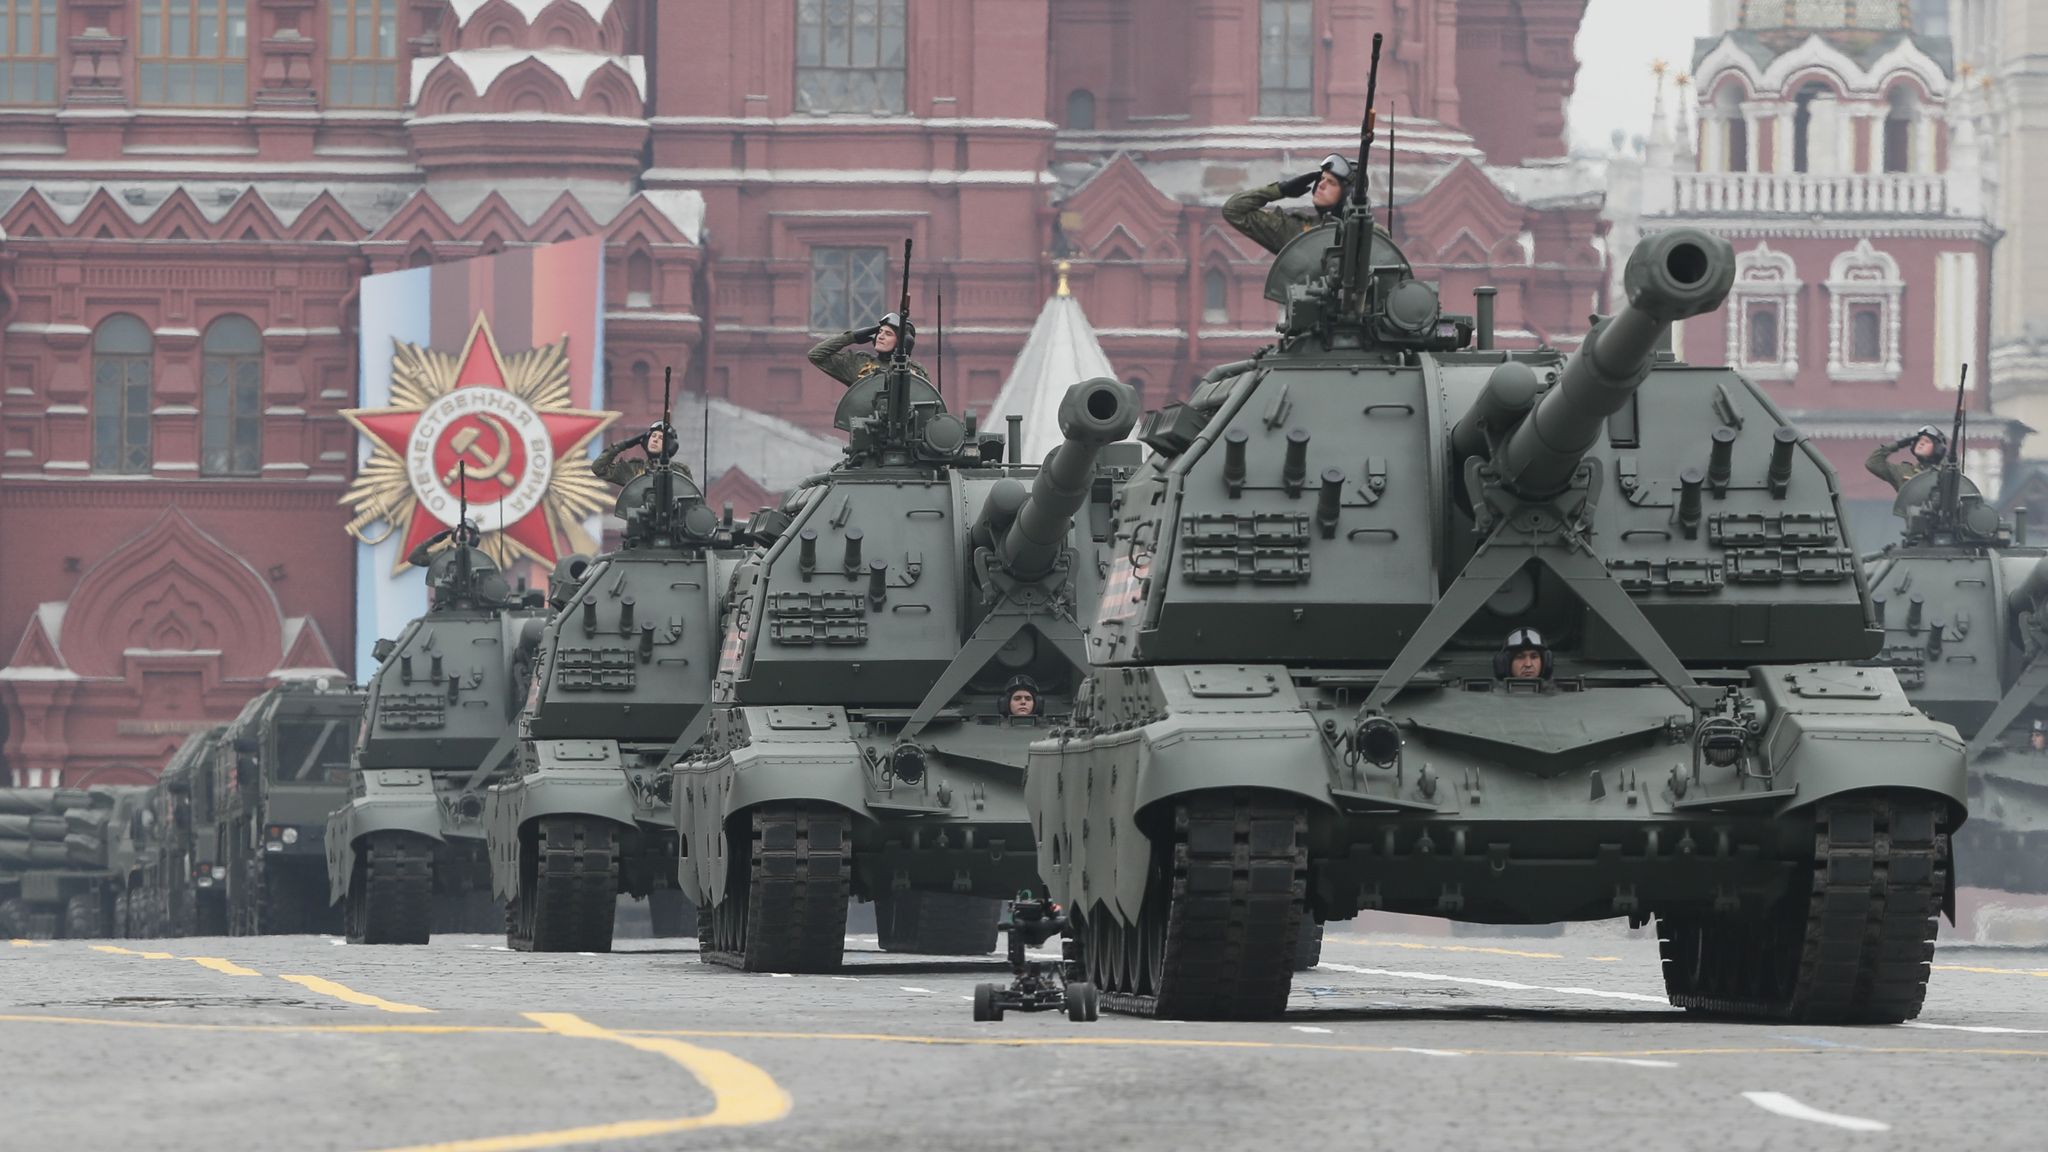 What is the reduced Russian Victory Day parade in 2023 compared to